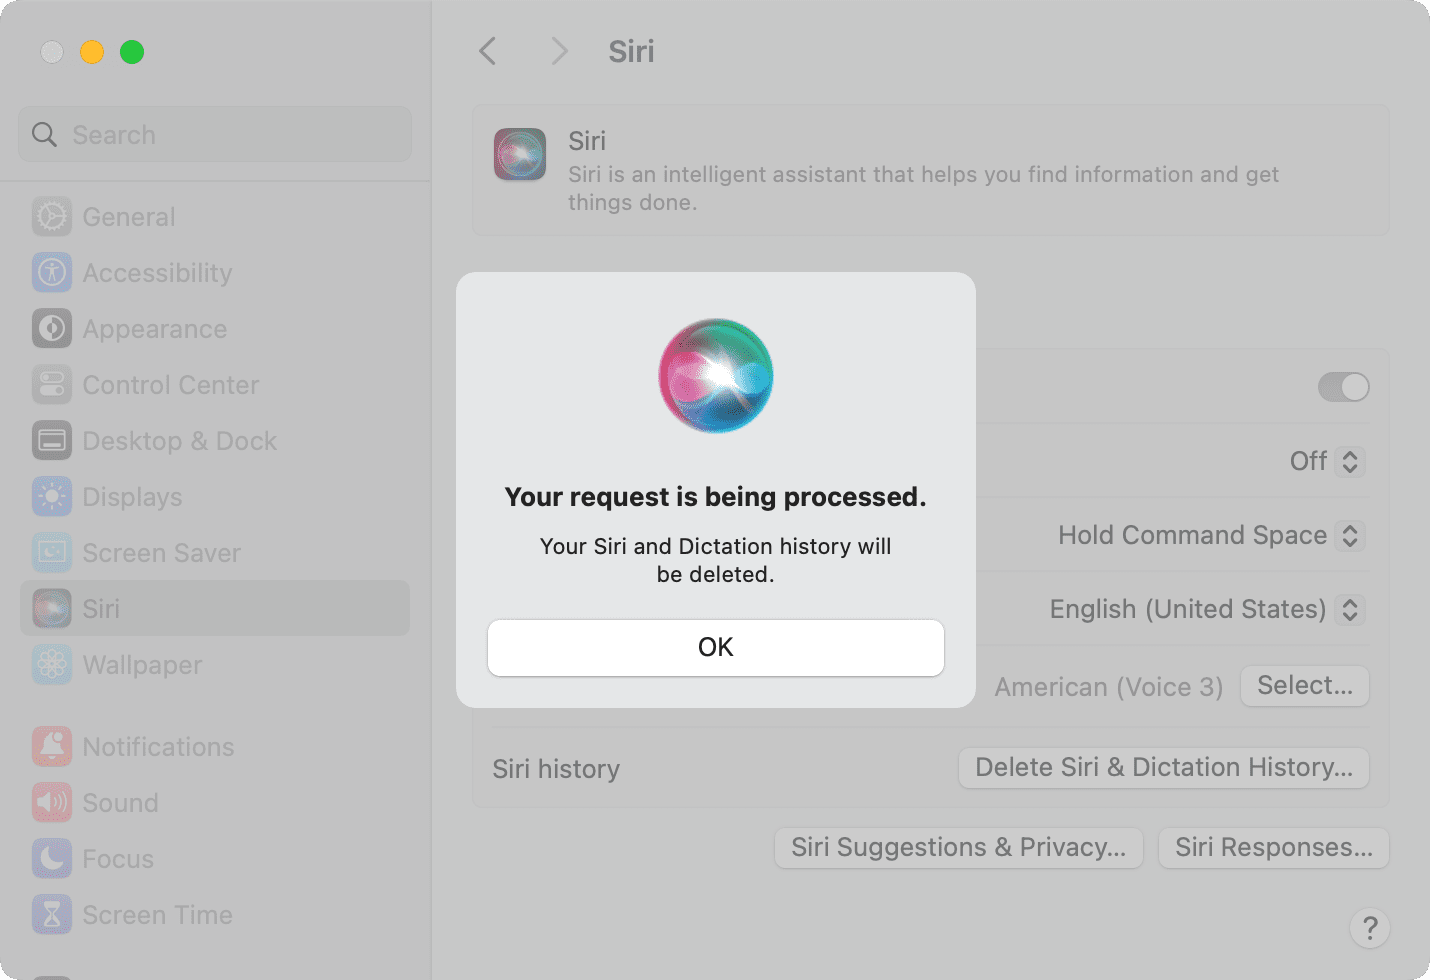 Your request is being processed to delete Siri data on Mac